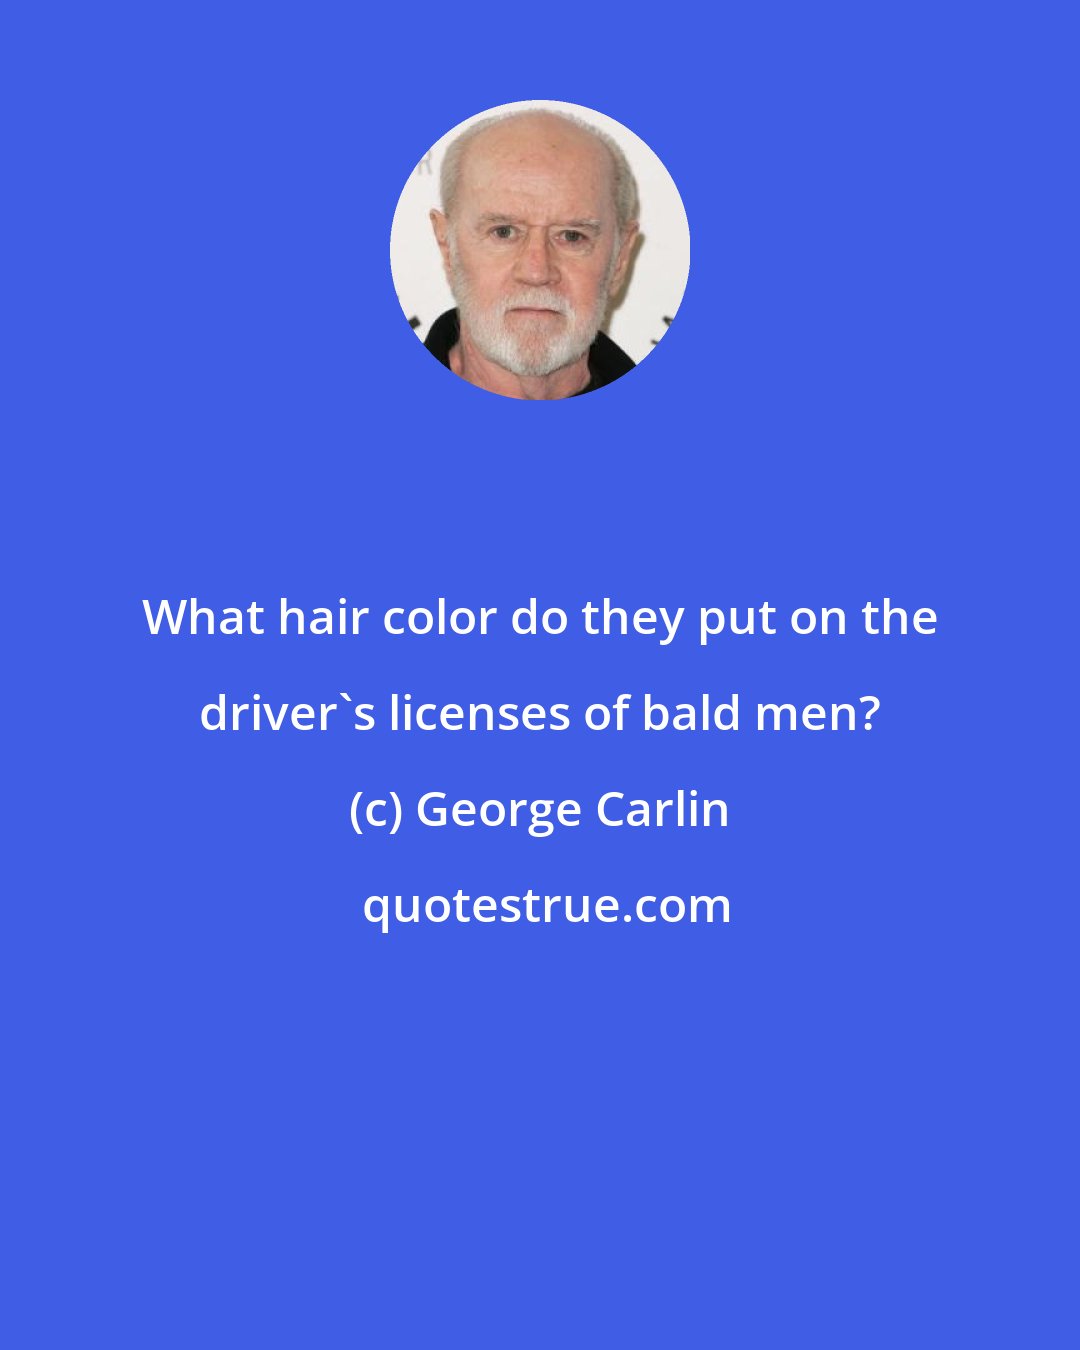 George Carlin: What hair color do they put on the driver's licenses of bald men?